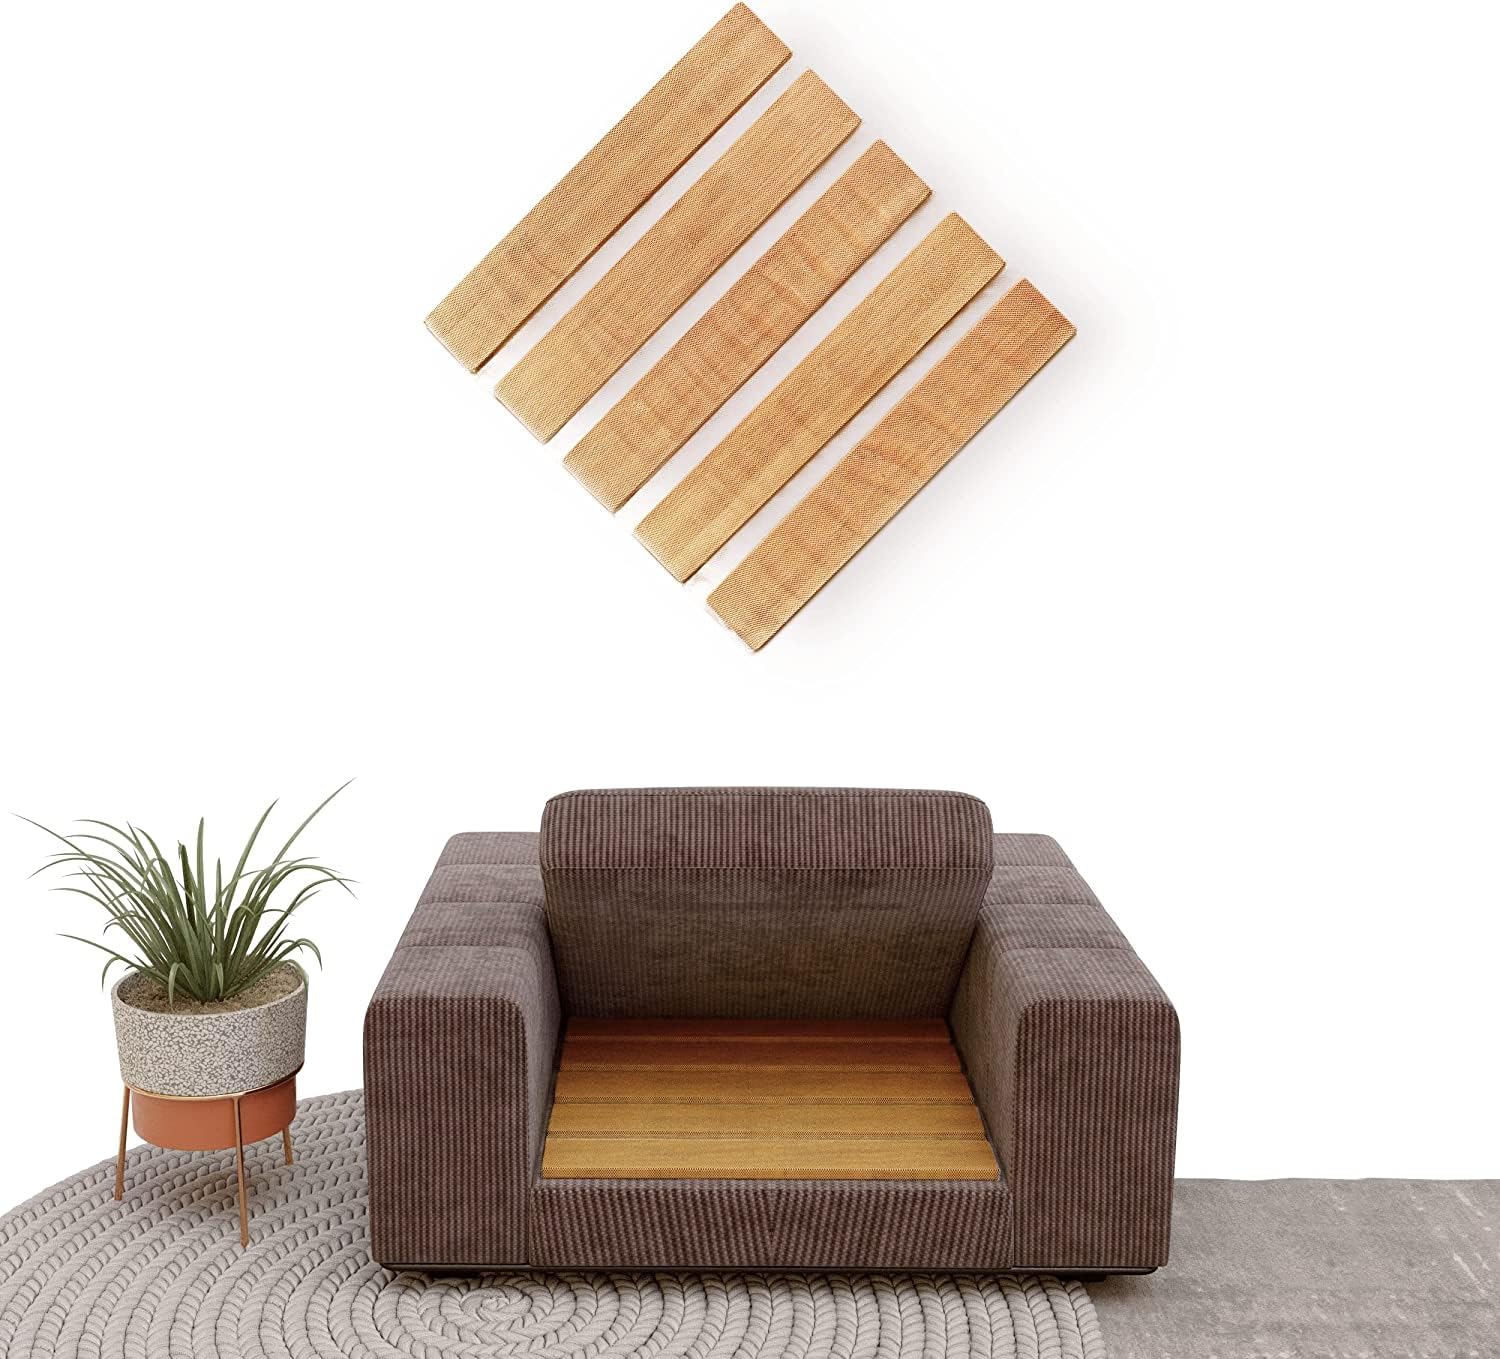 Trustic - Adjustable Bamboo Cushion Support - Furniture Sagging Fix, Size 21"x 22"  - Like New